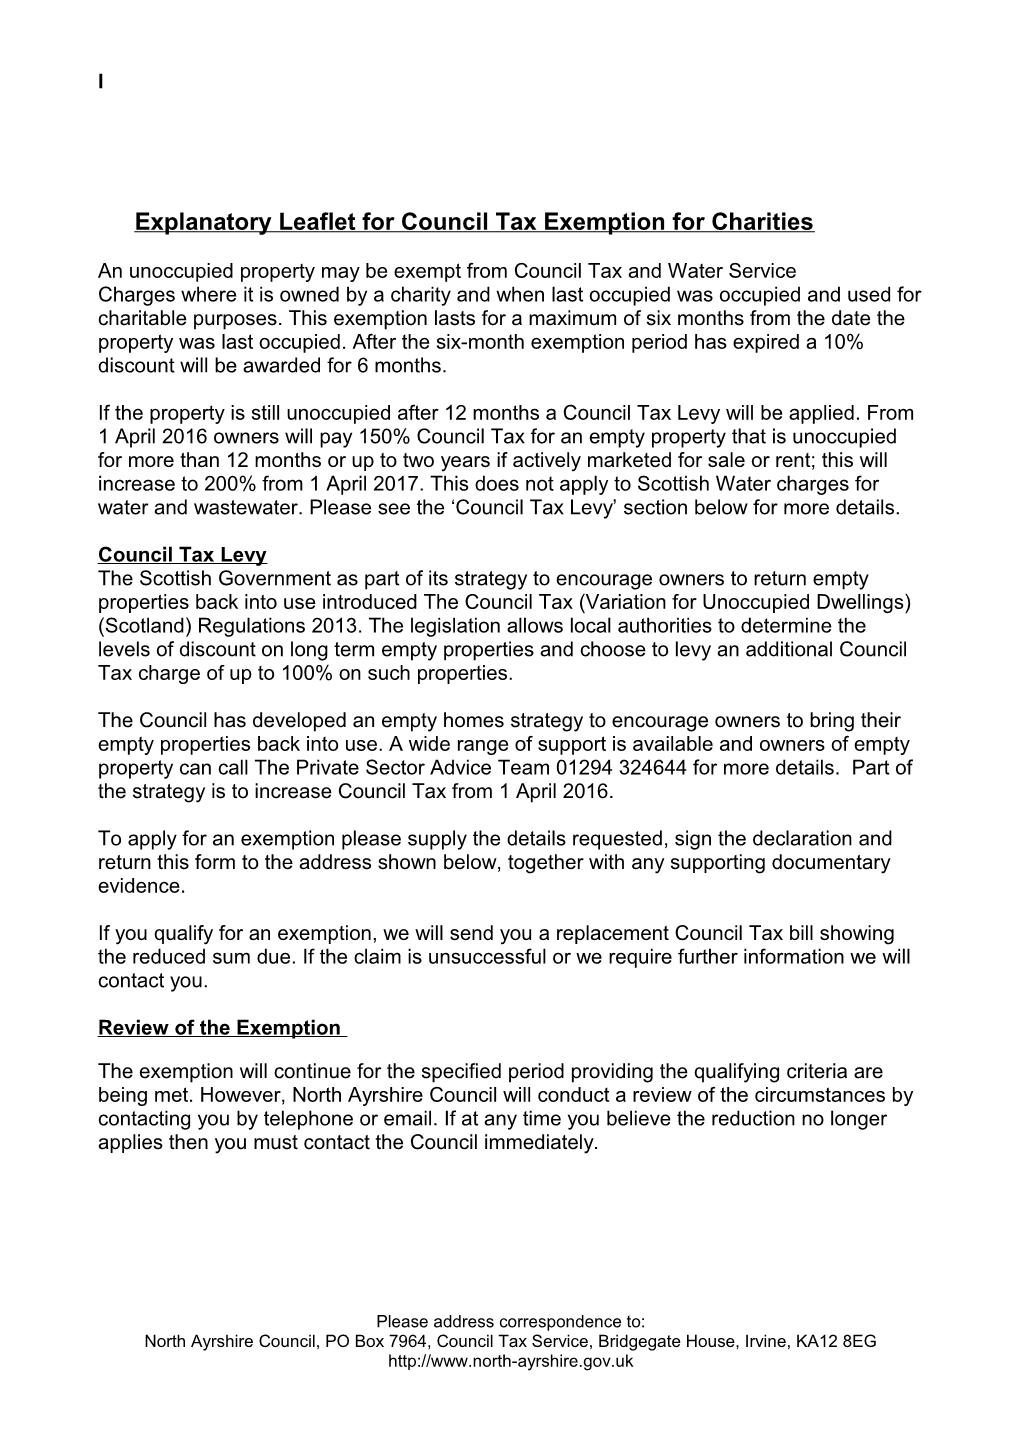 Council Tax - Exemption - Charities